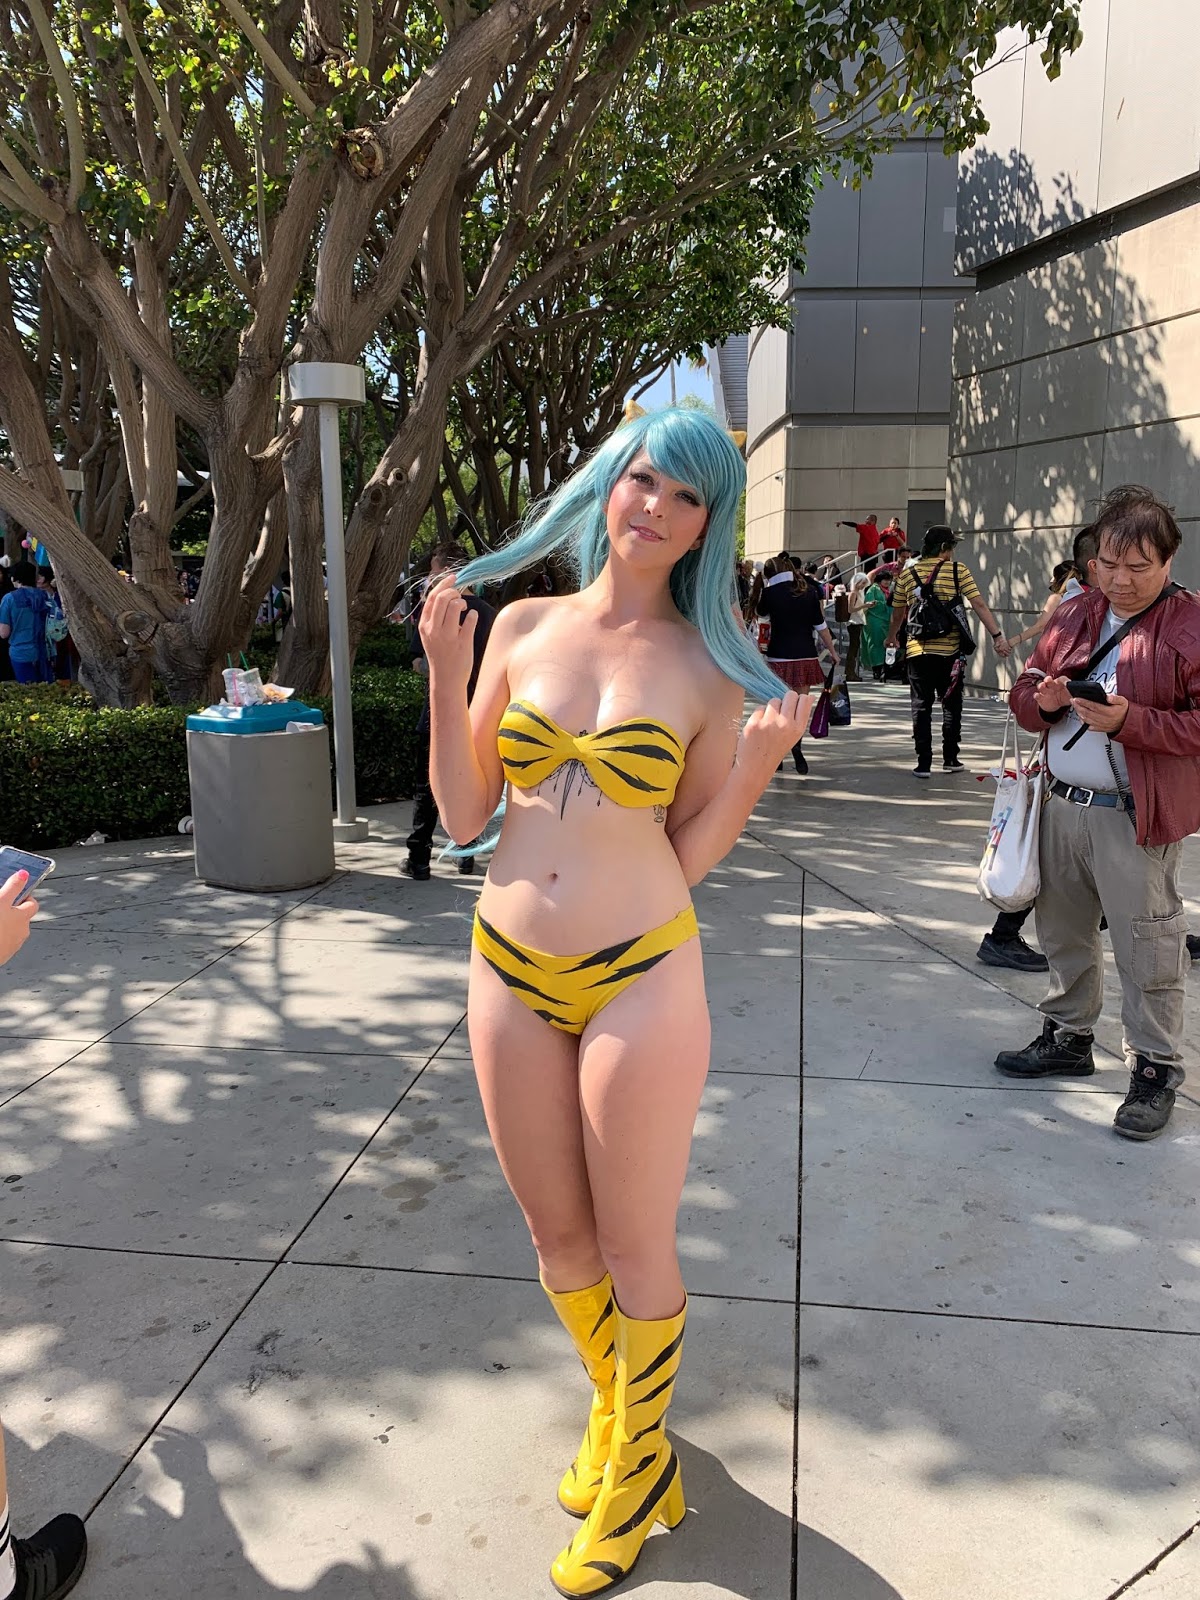 Things To Do In Los Angeles: Anime Expo 2019: Cosplay Gallery